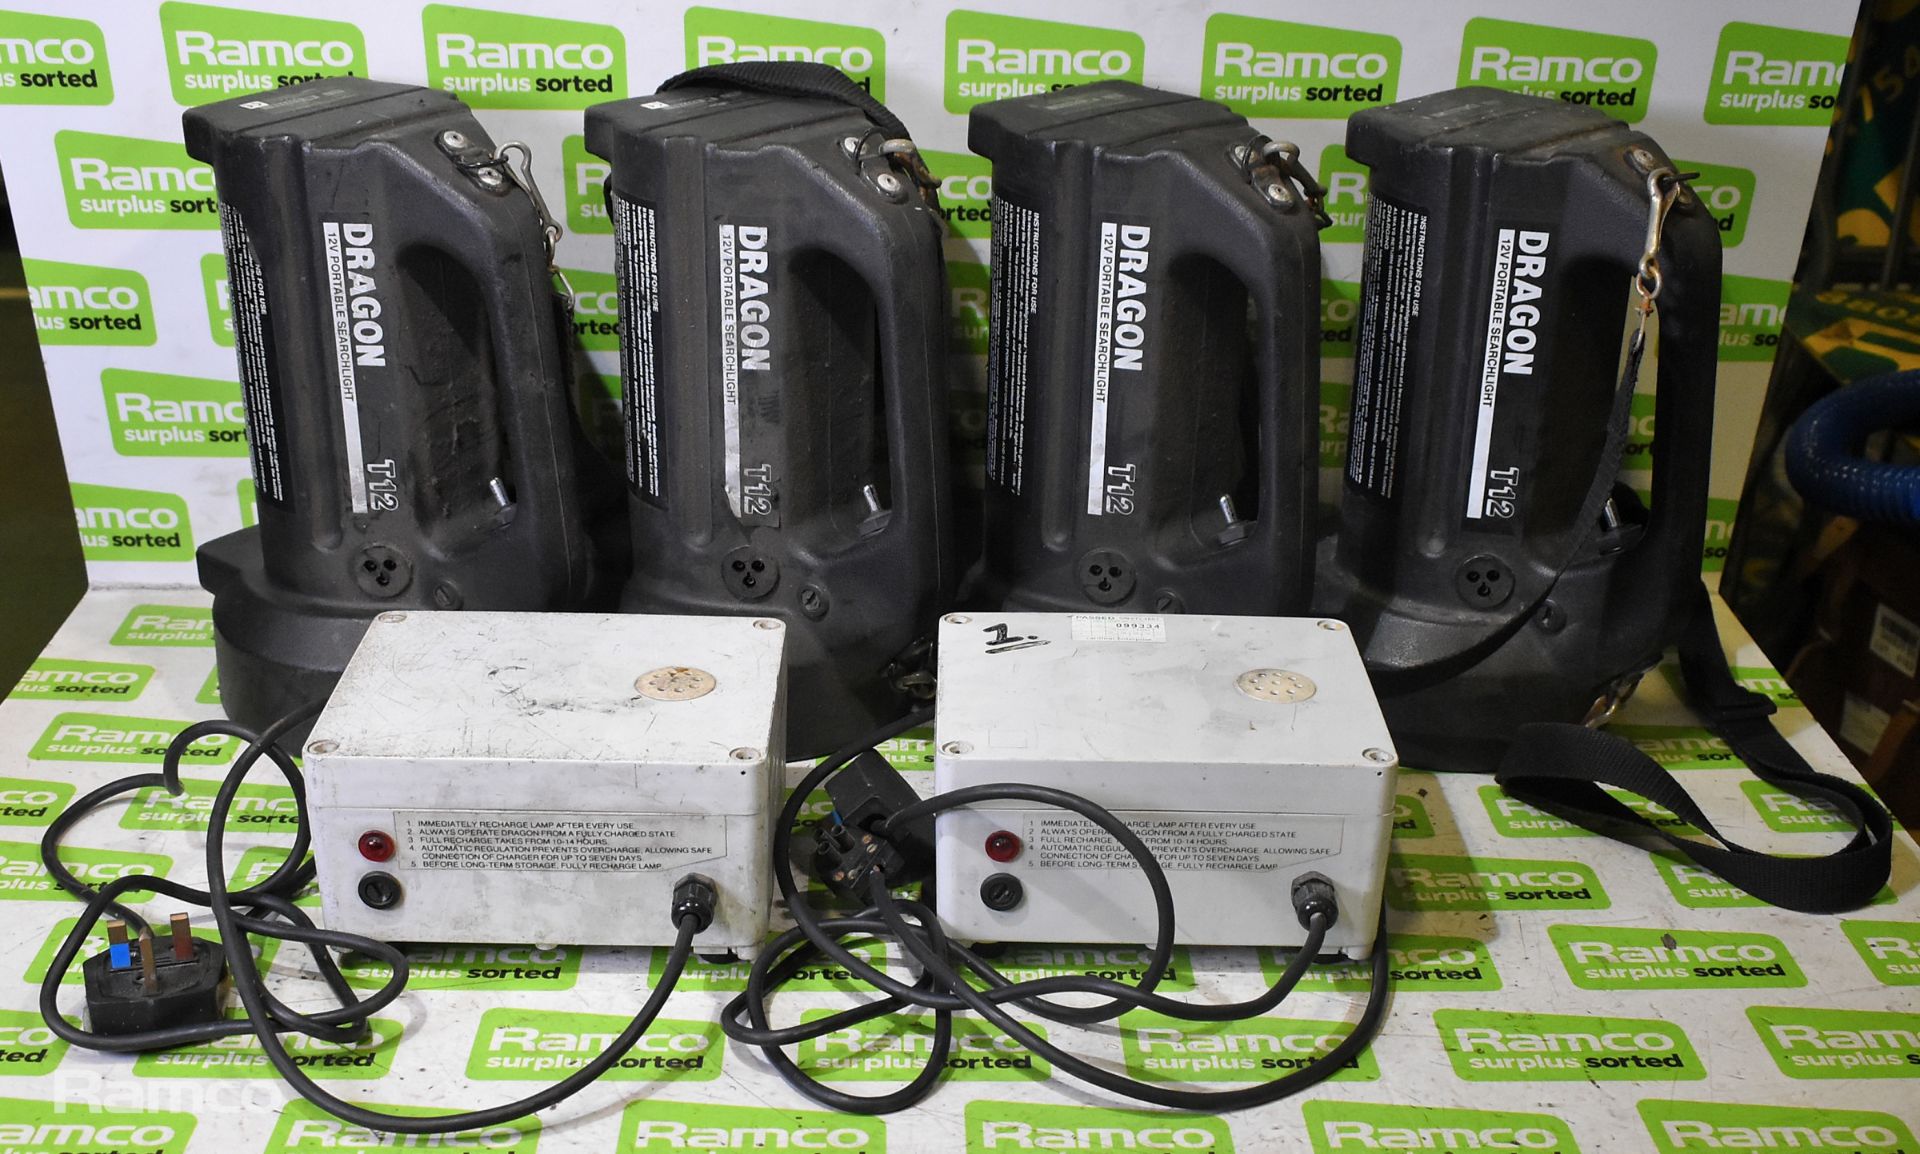 4x Dragon T12 50W portable searchlights, 2x Dragon T12 mains battery chargers